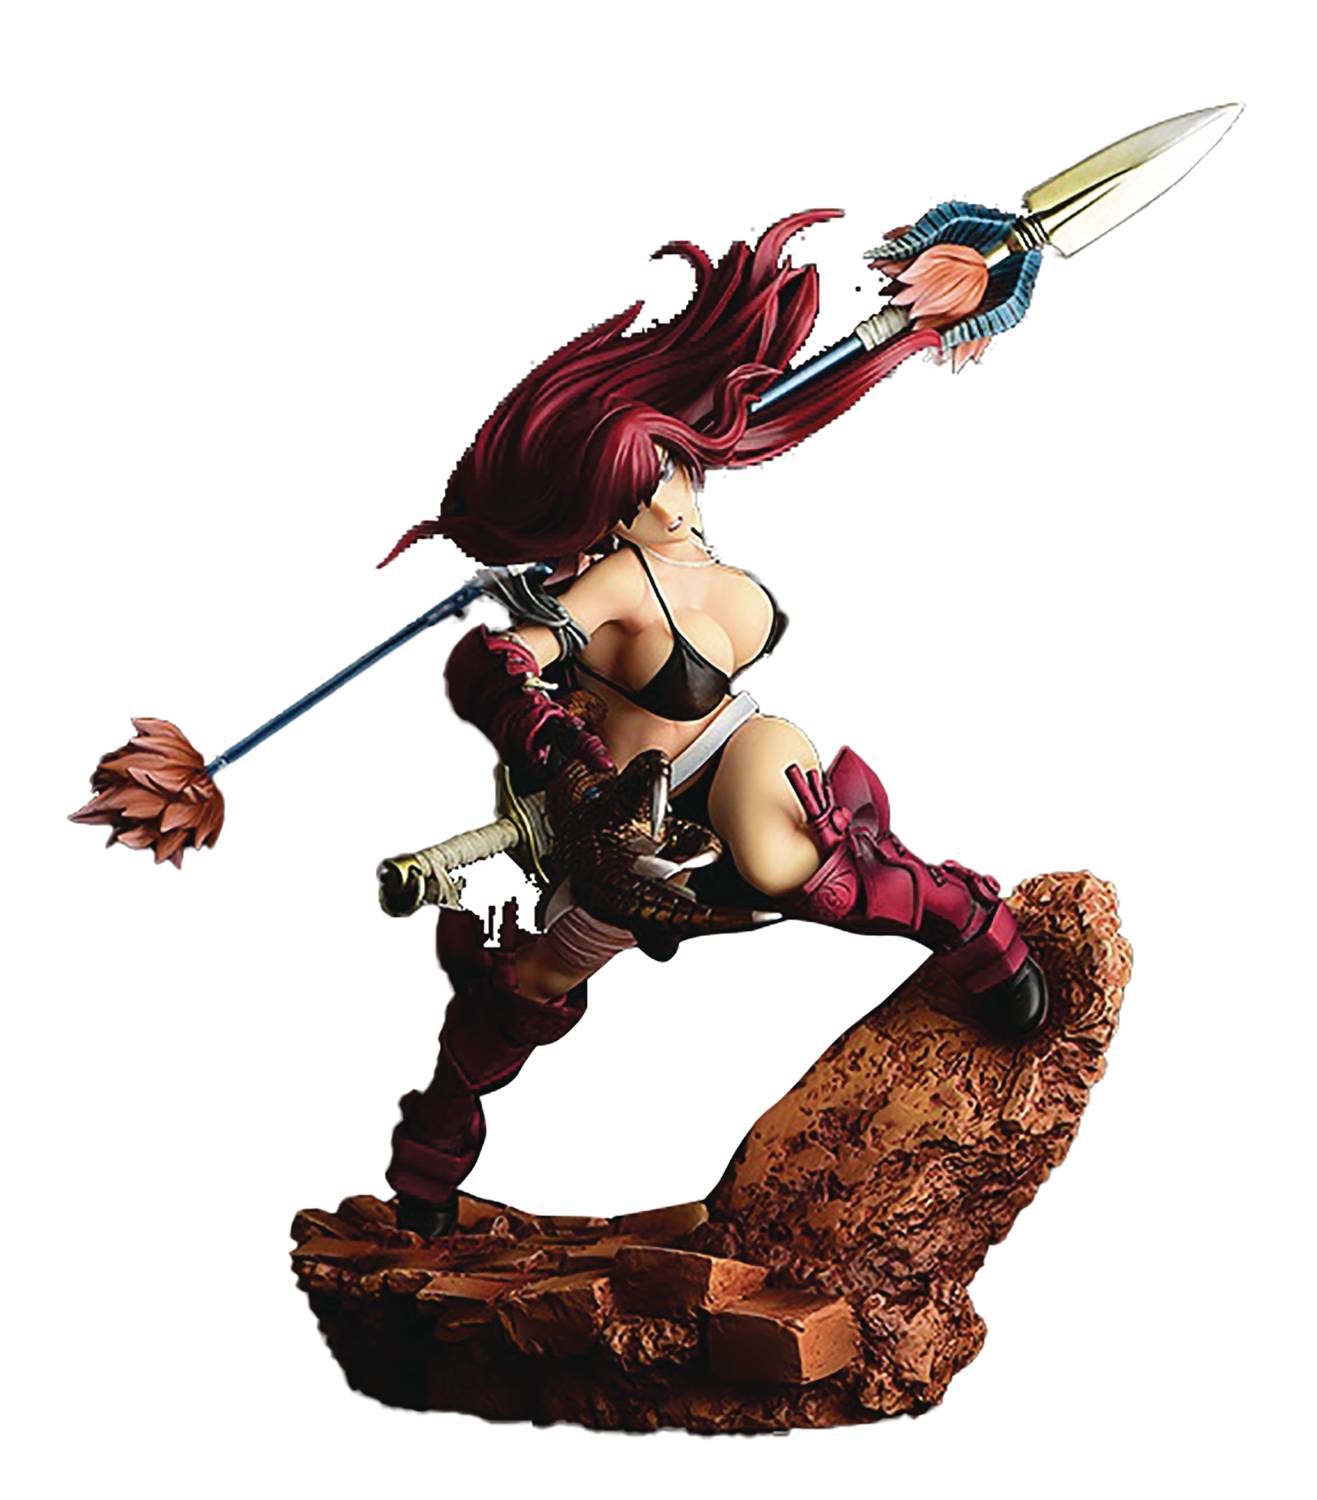 FAIRY TAIL ERZA SCARLET THE KNIGHT CRIMSON ARMOR 1/6 PVC FIG